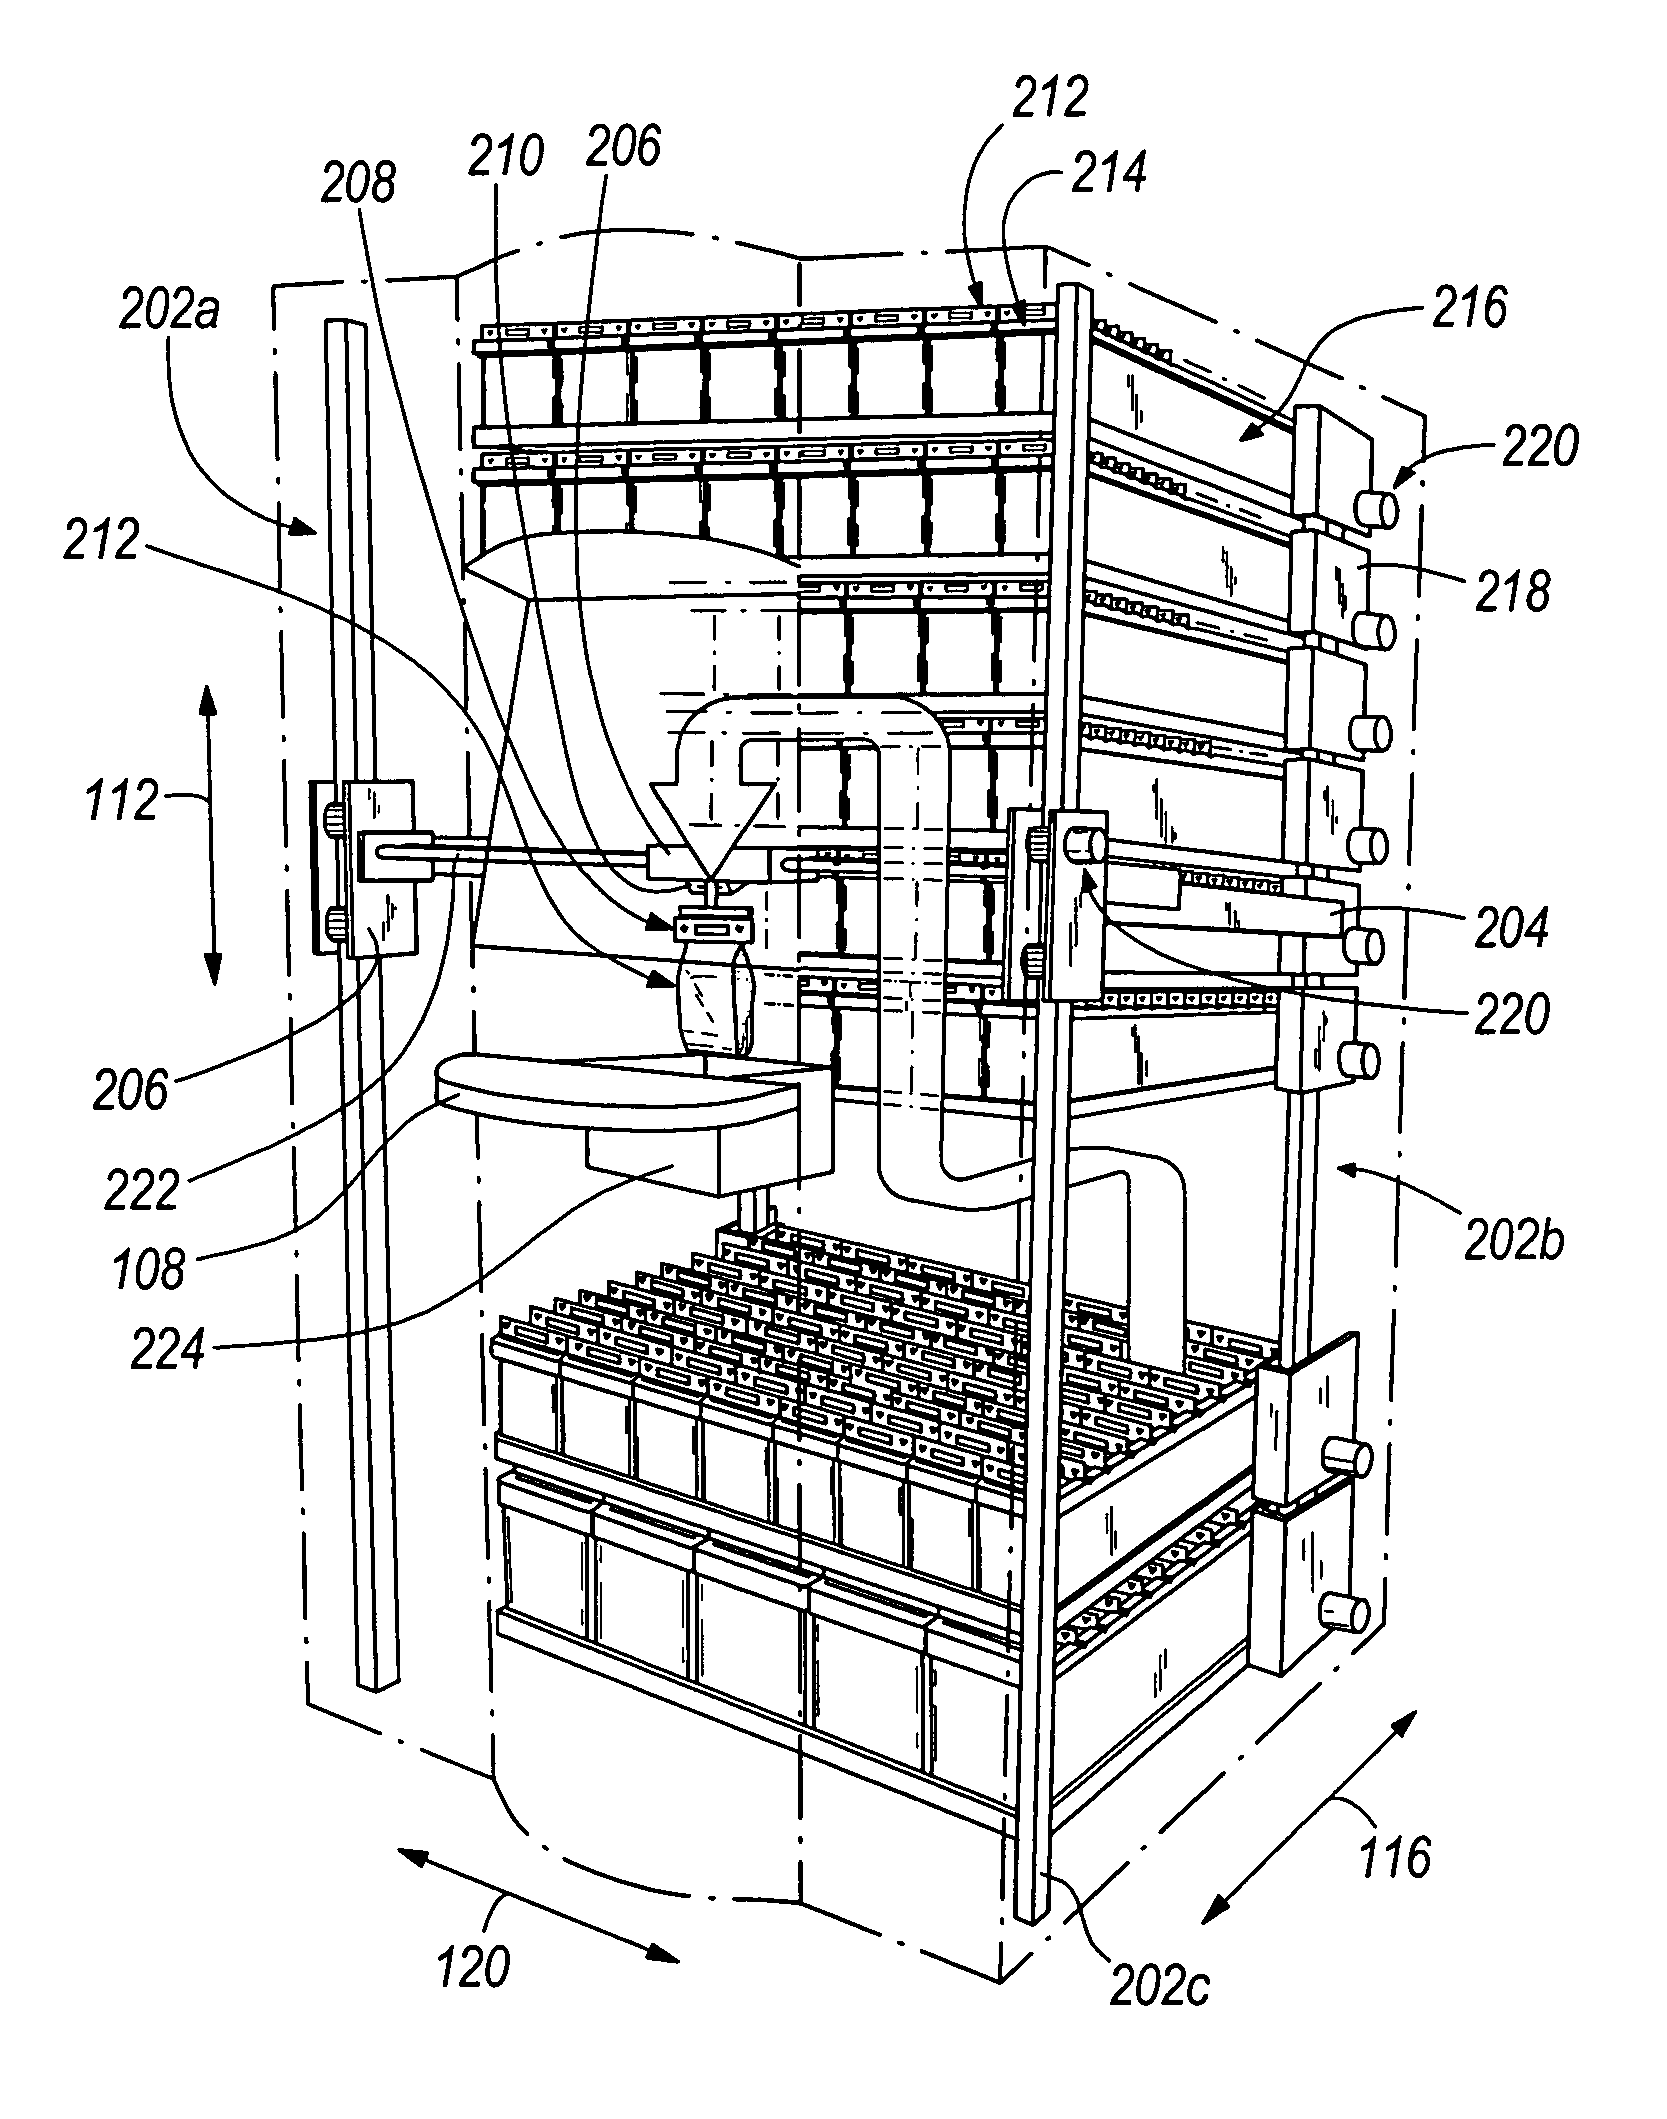 System and method for providing a random access and random load dispensing unit